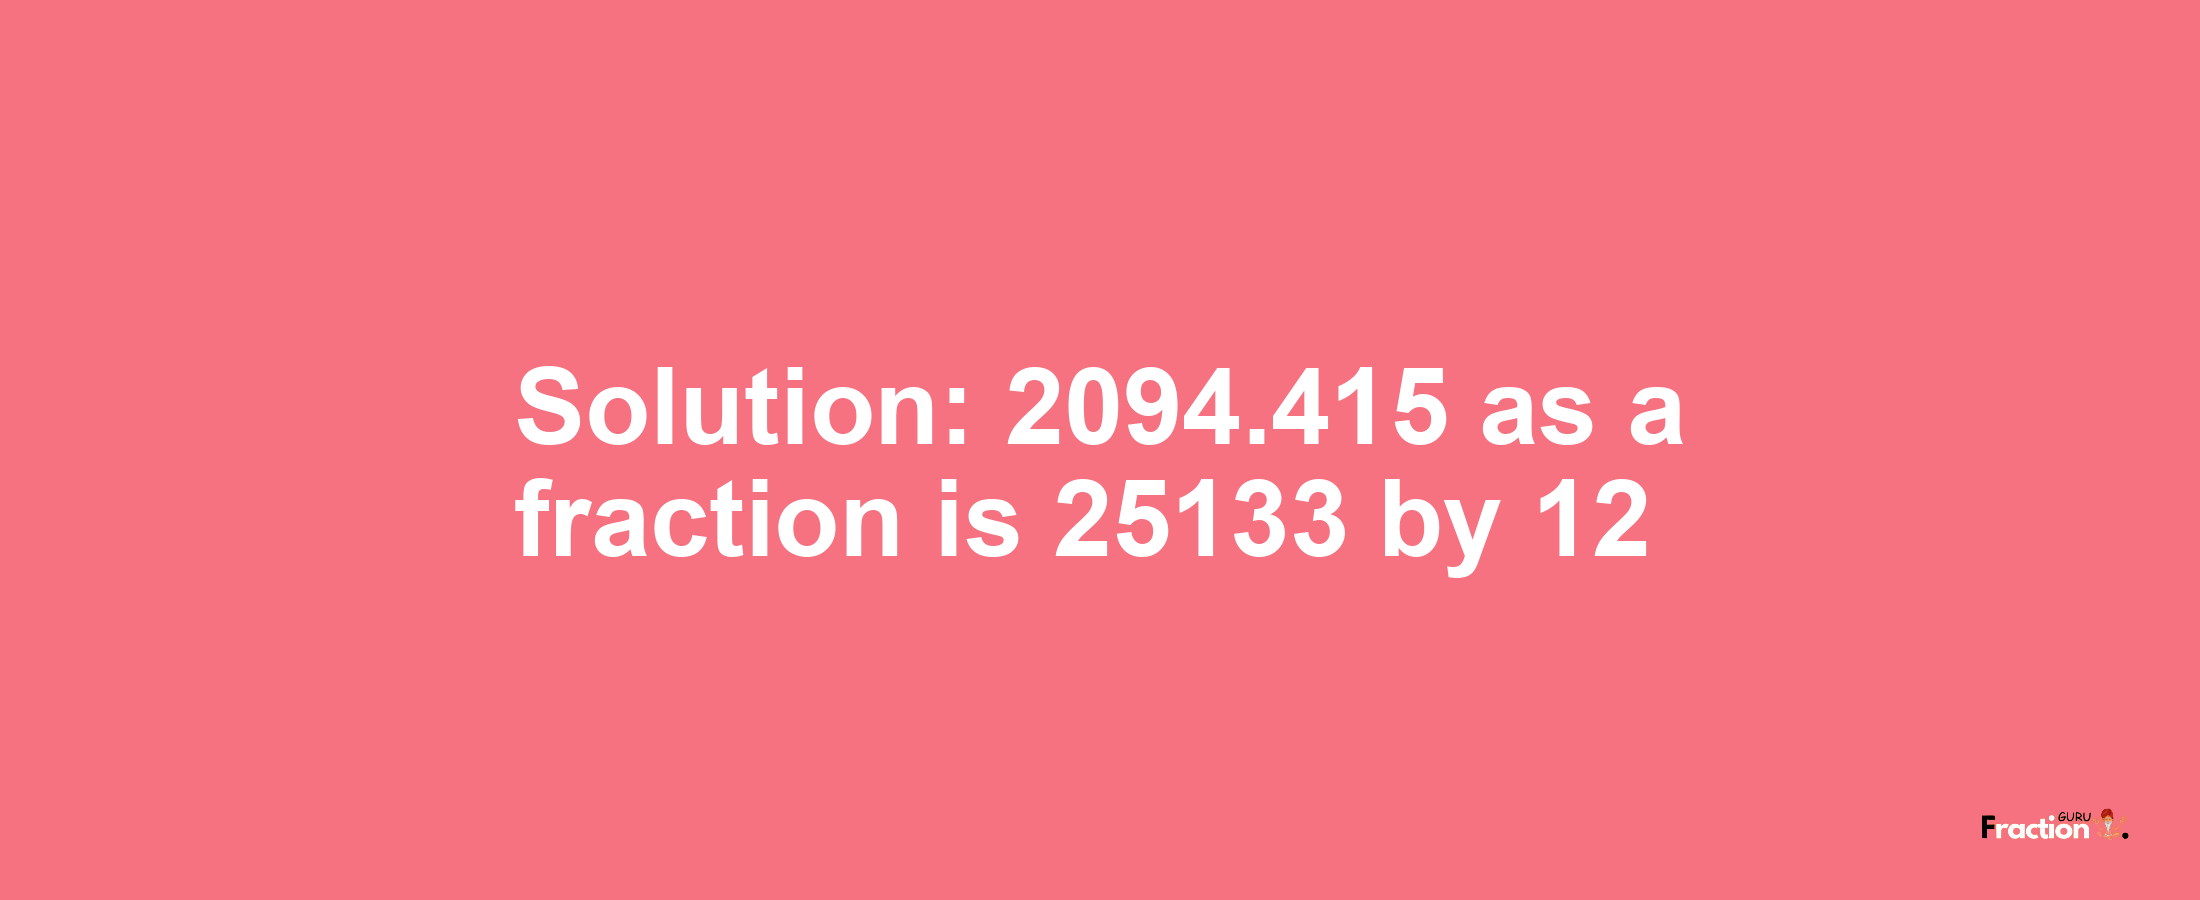 Solution:2094.415 as a fraction is 25133/12